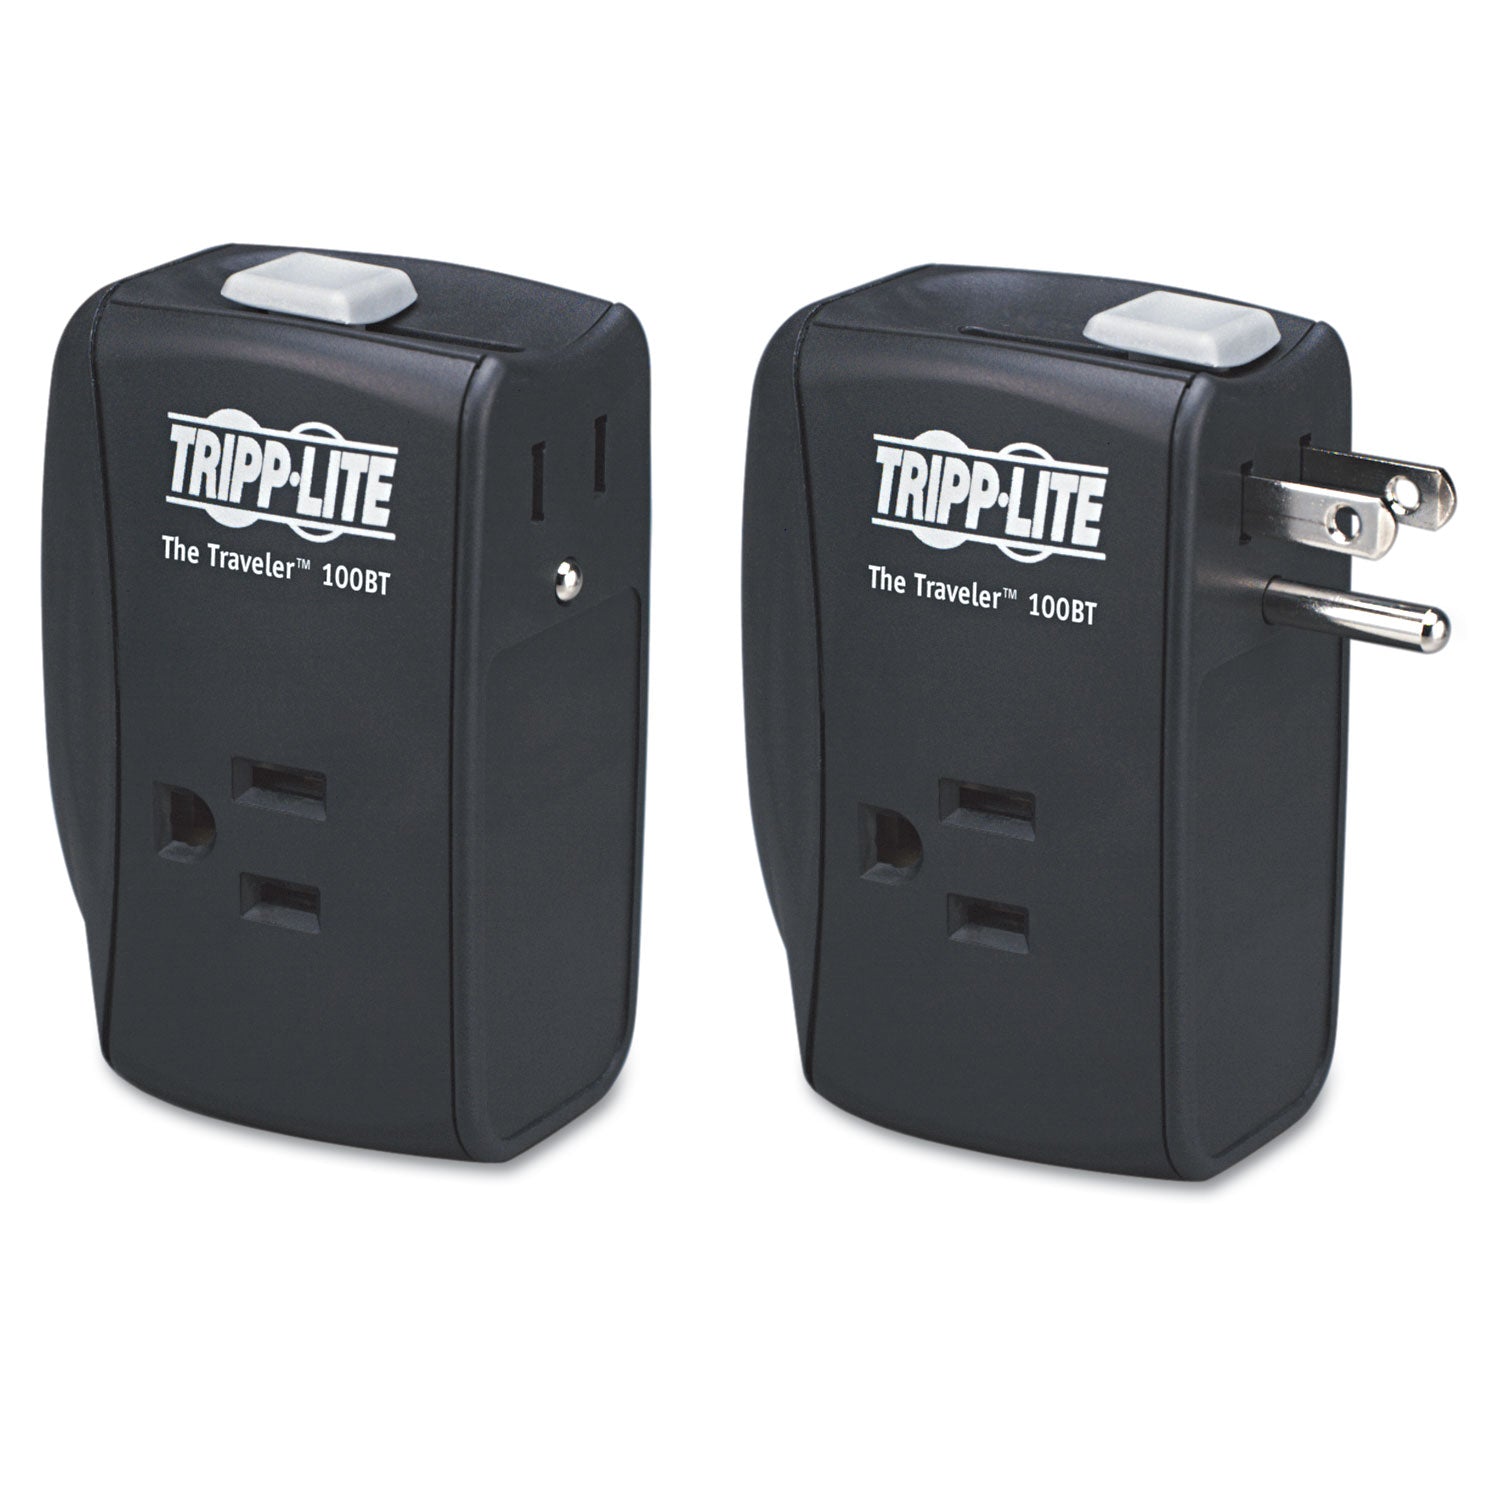 Protect It! Portable Surge Protector, 2 AC Outlets, 1,050 J, Black - 